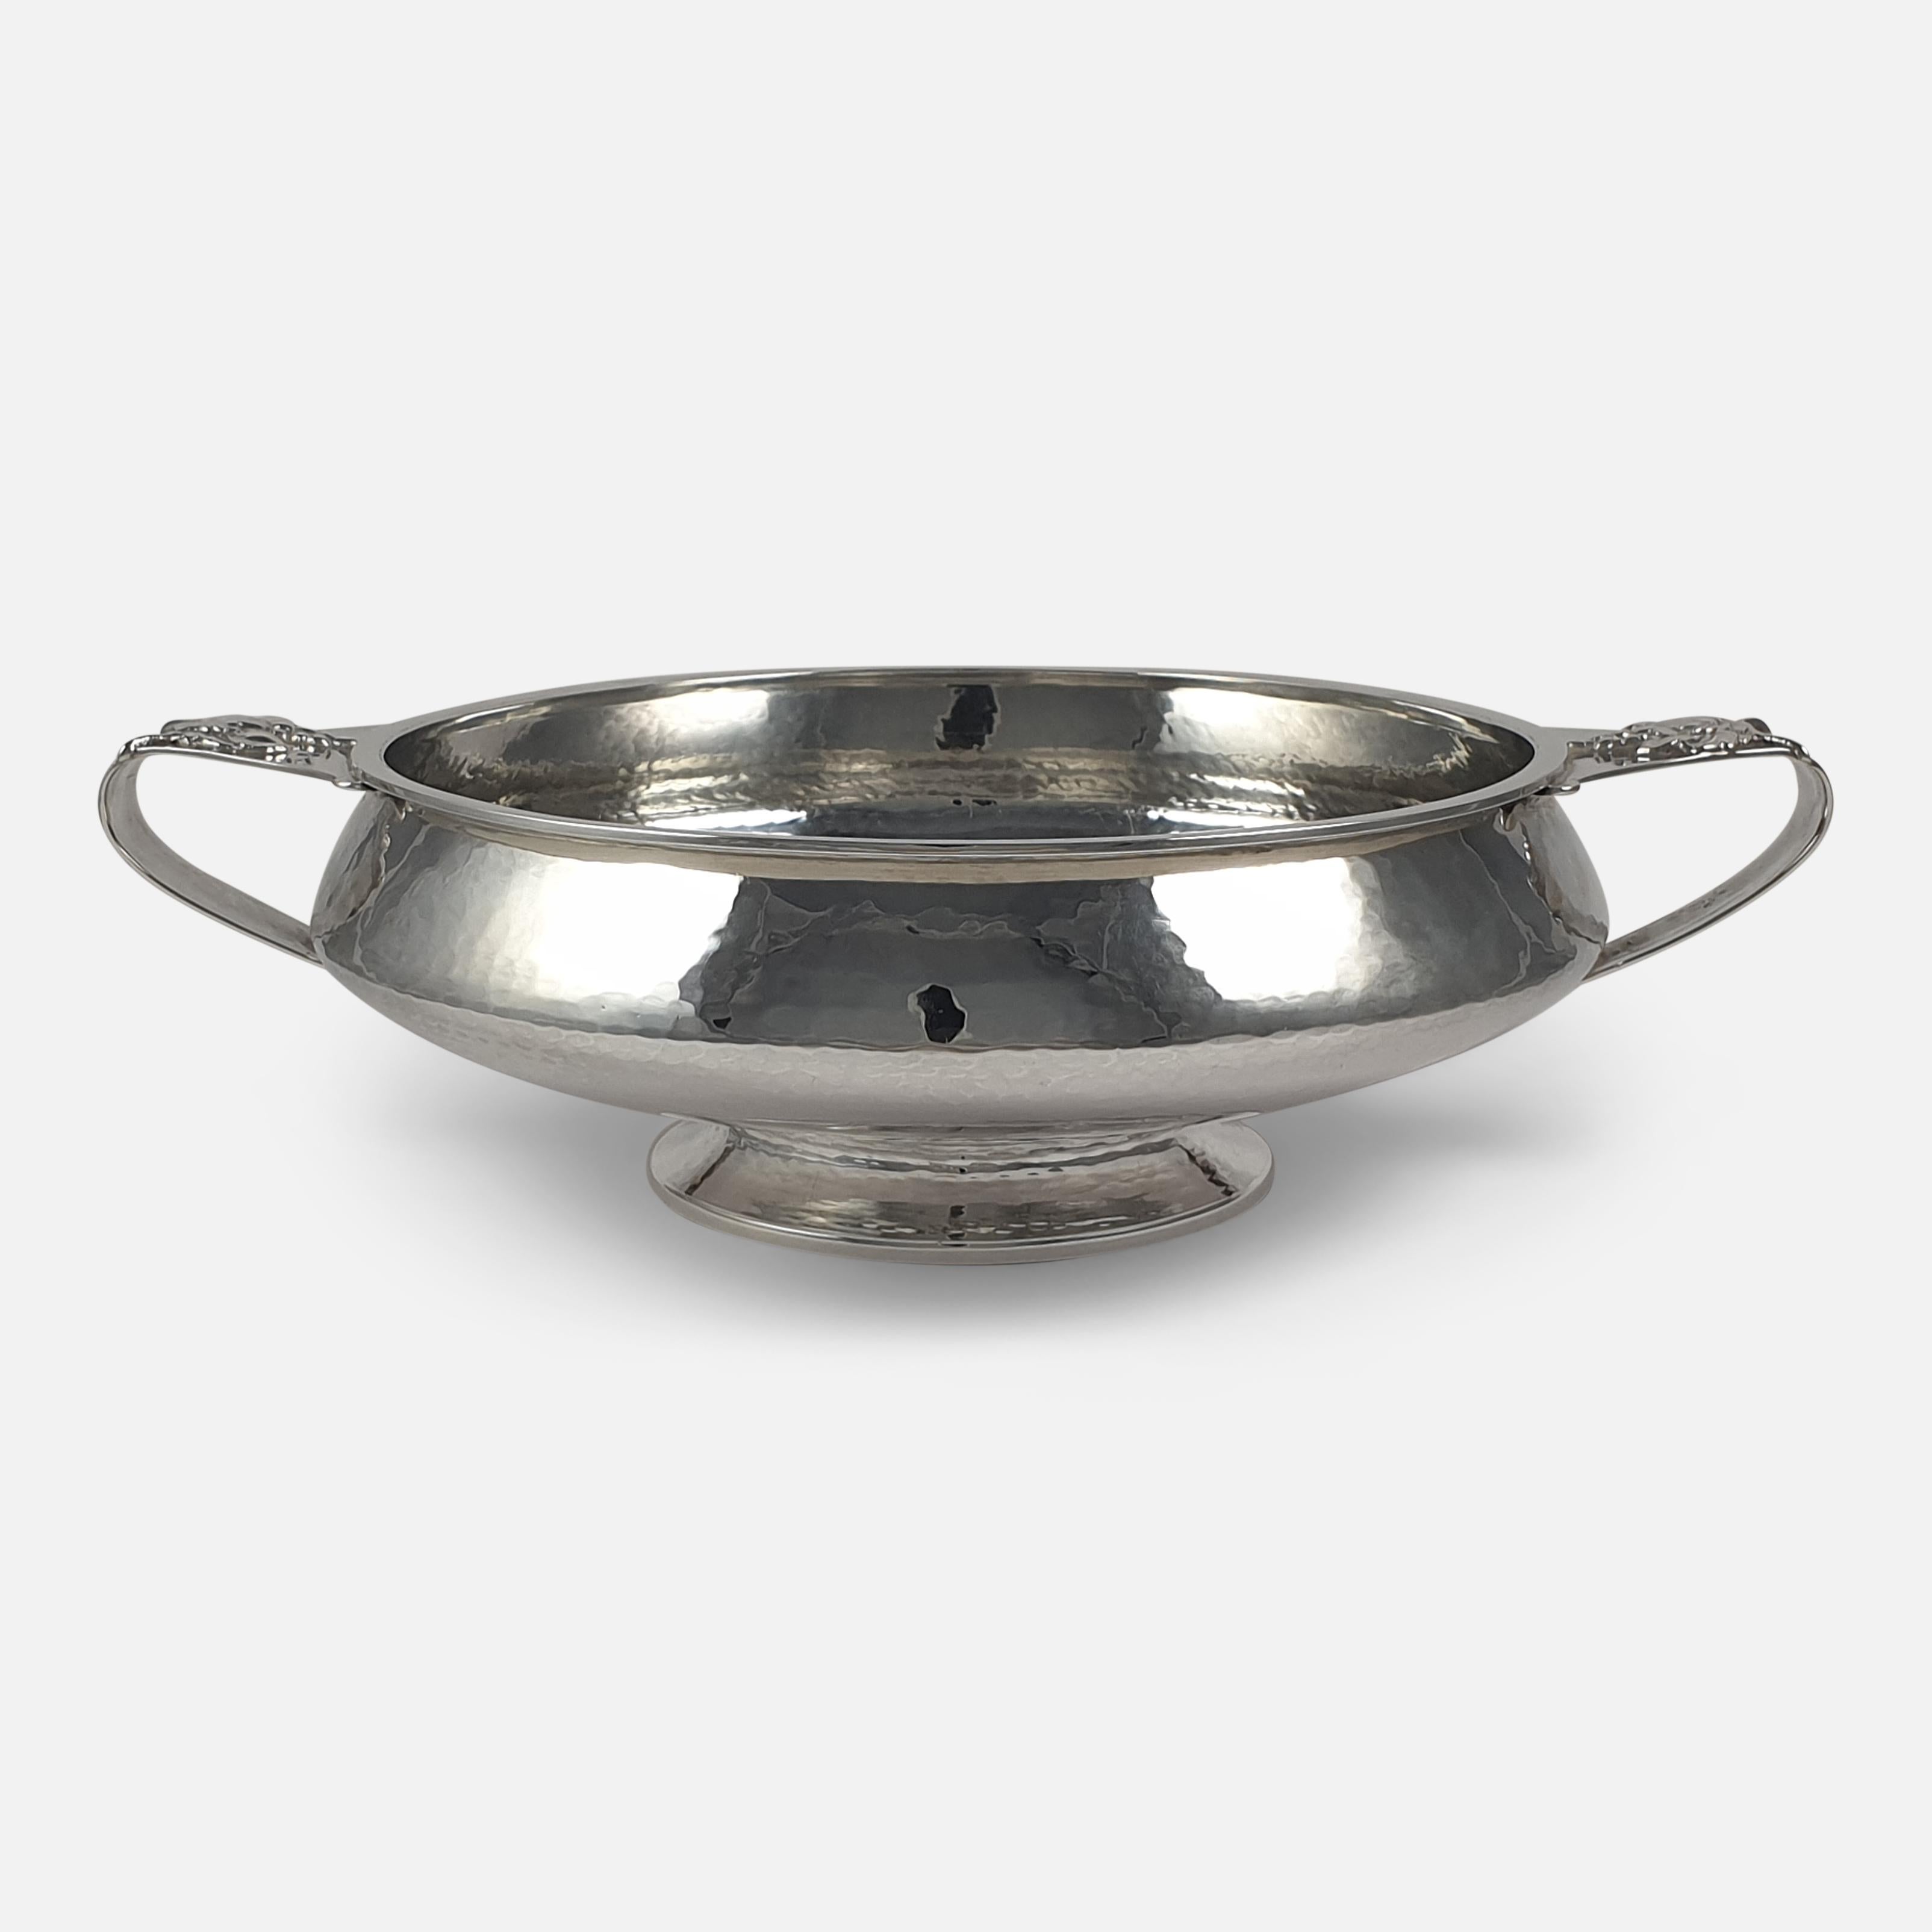 An Arts & Crafts sterling silver twin-handled bowl by A. E. Jones, Birmingham, 1928. The two handled bowl is of circular form, spot-hammered decoration, the side handles applied with grapes and vine leaves, on a raised circular foot.

Assay: -